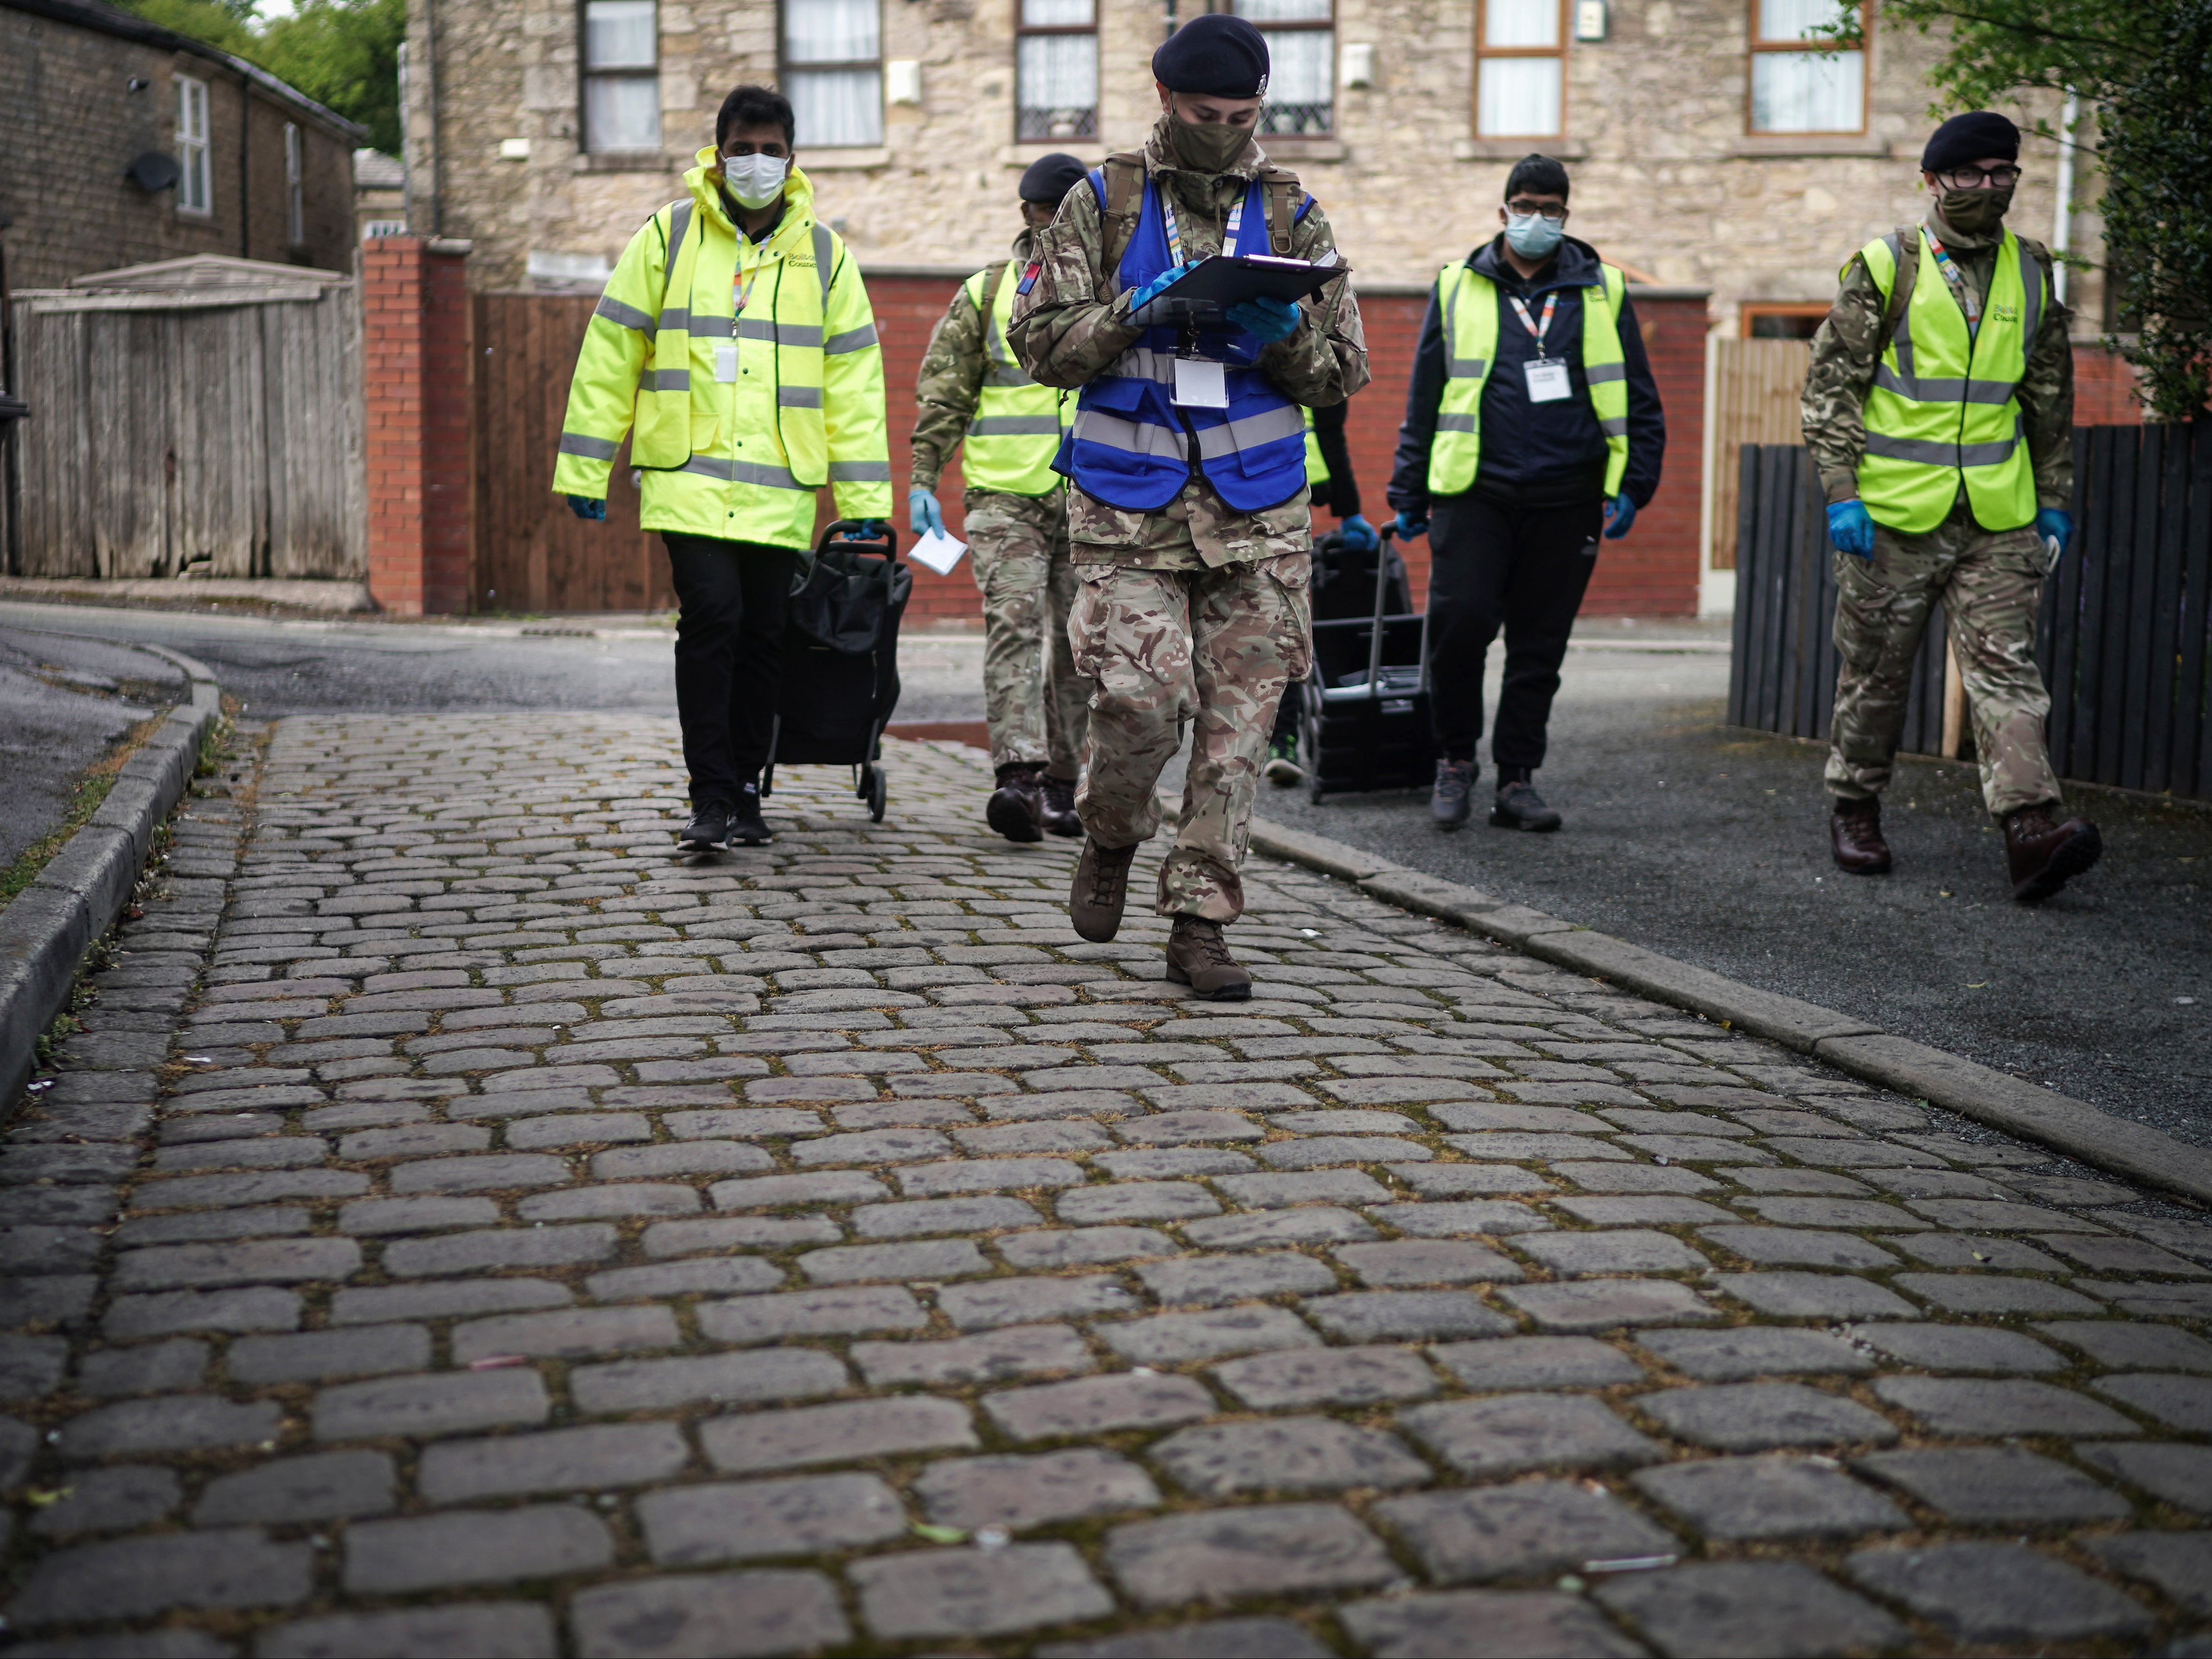 Members of the army help hand out Covid tests in Bolton